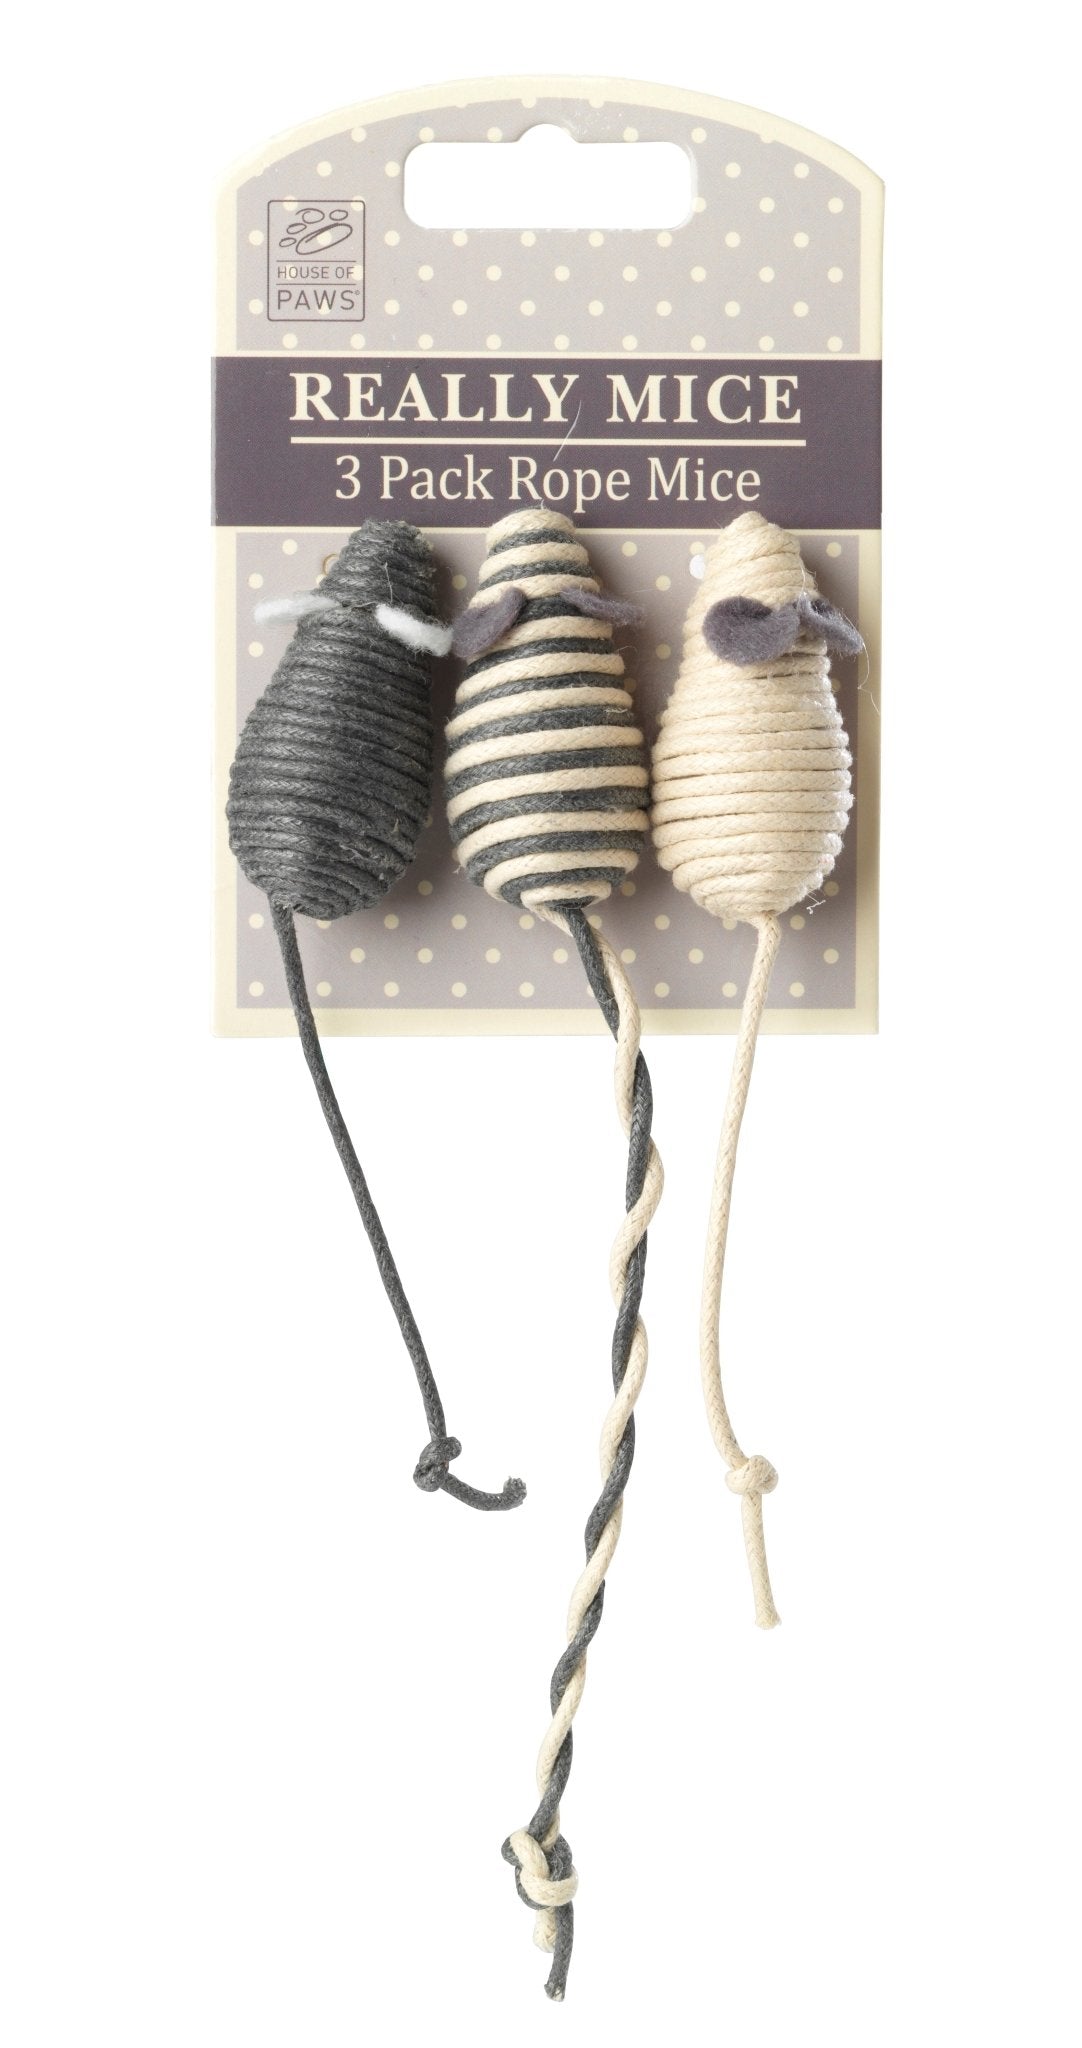 House of Paws Really Mice Rope Mice 3 Pack x 4, House of Paws,